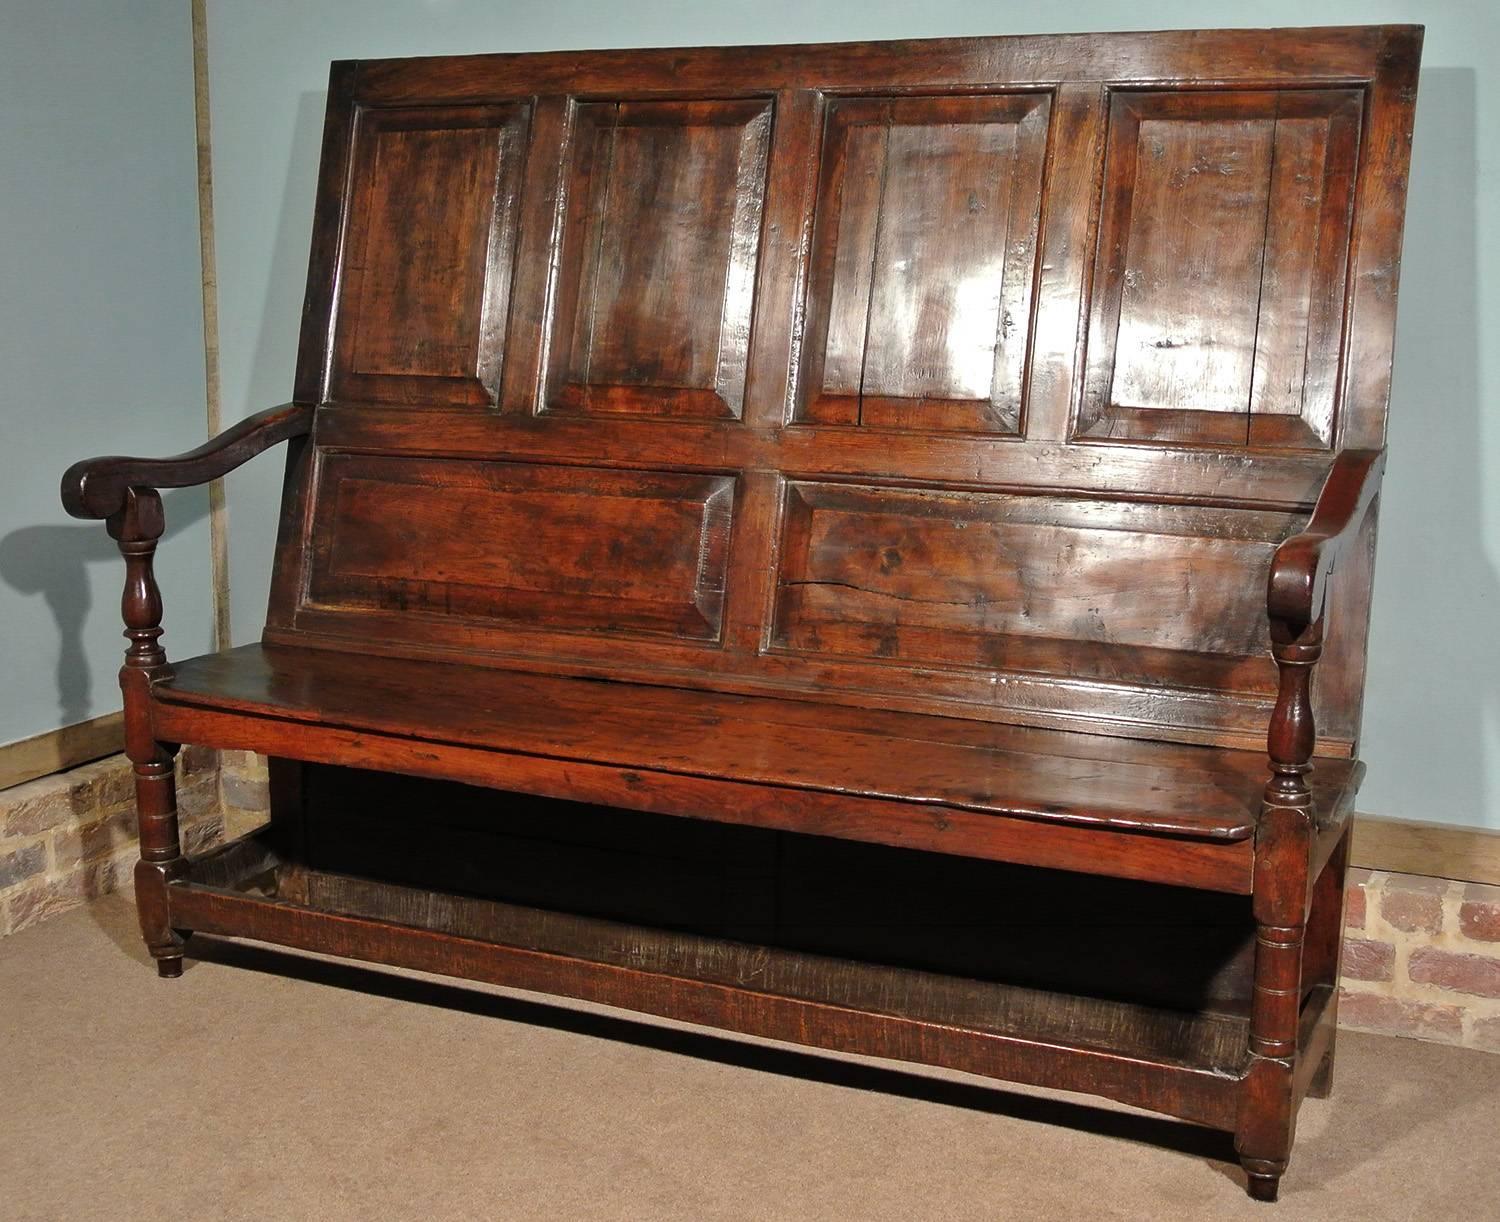 With a fabulous color and natural patina, this early oak and elm settle dates from circa 1680.

The tall back with chamfered and fielded oak panels, the seat with original boards and lovely solid well shaped arms on gunbarrel turned and channel